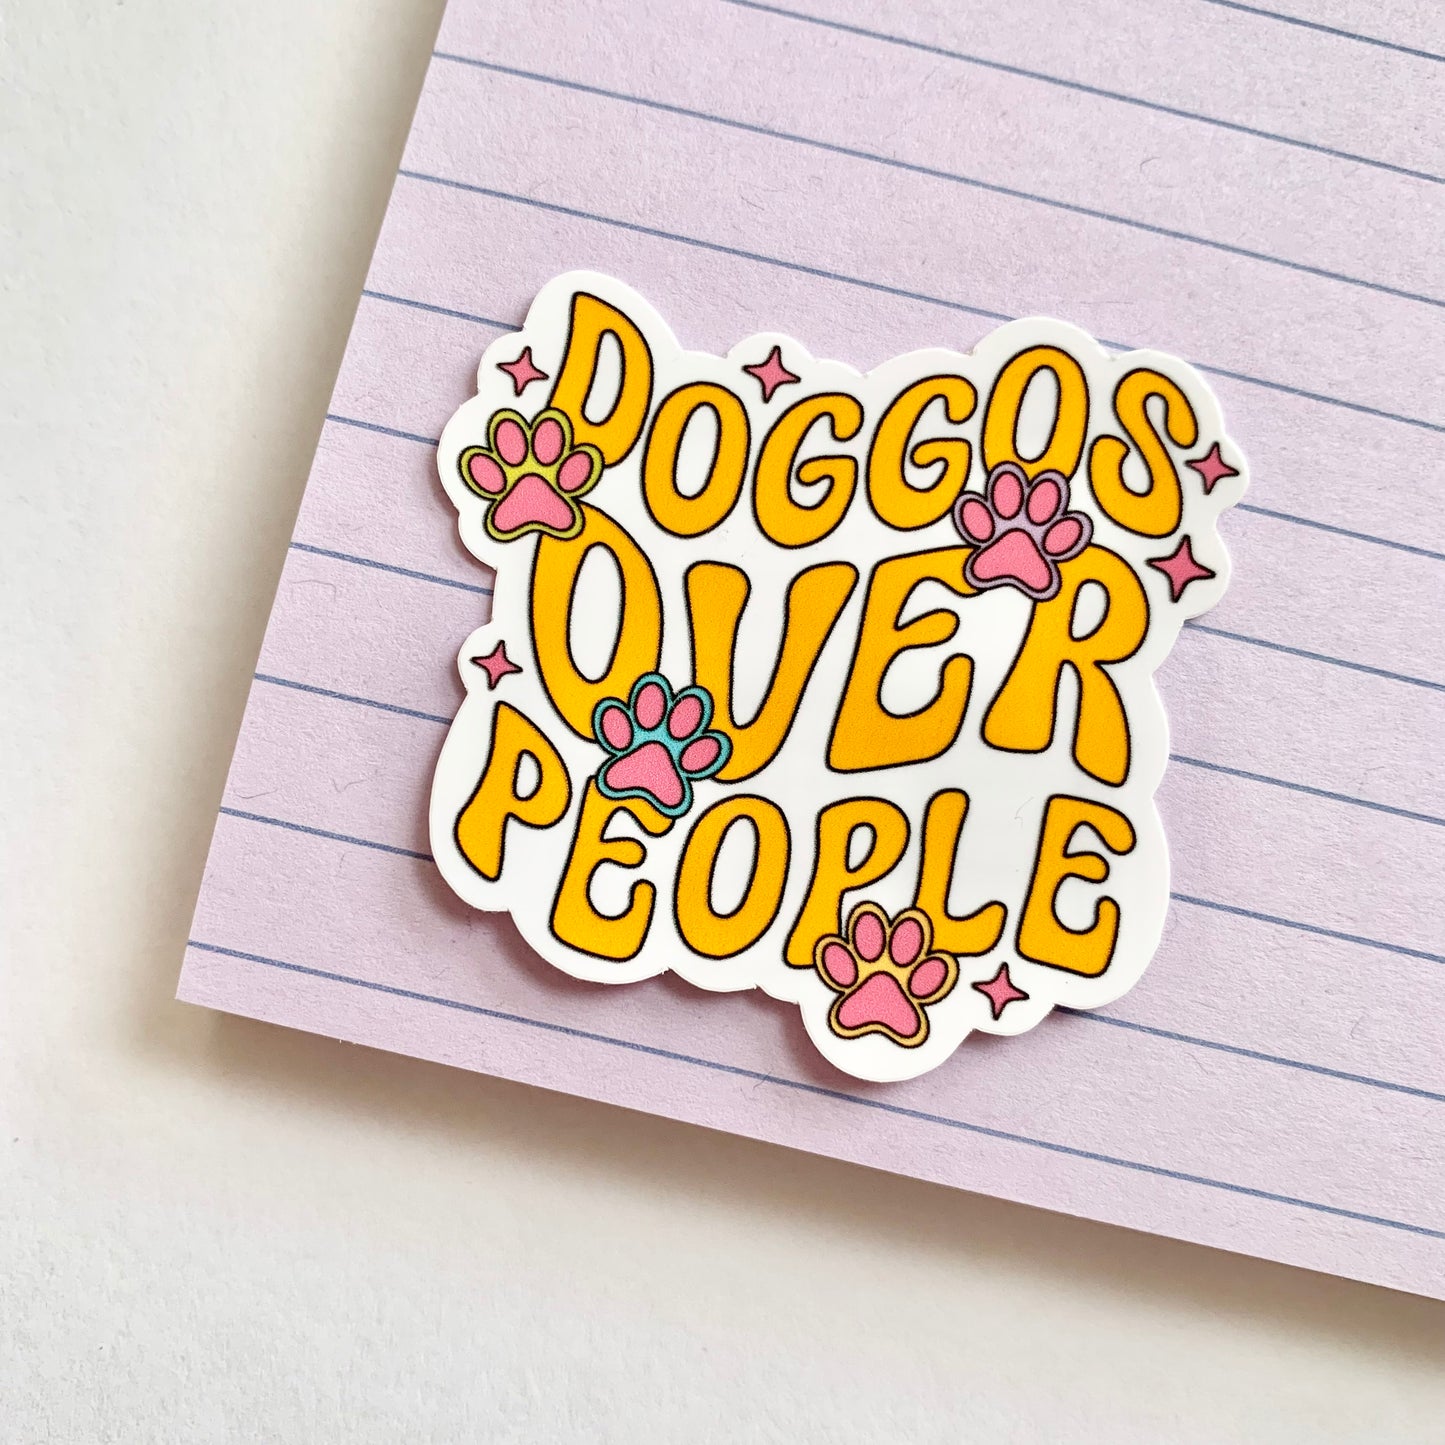 Dogs over People - Dog Lover Sticker